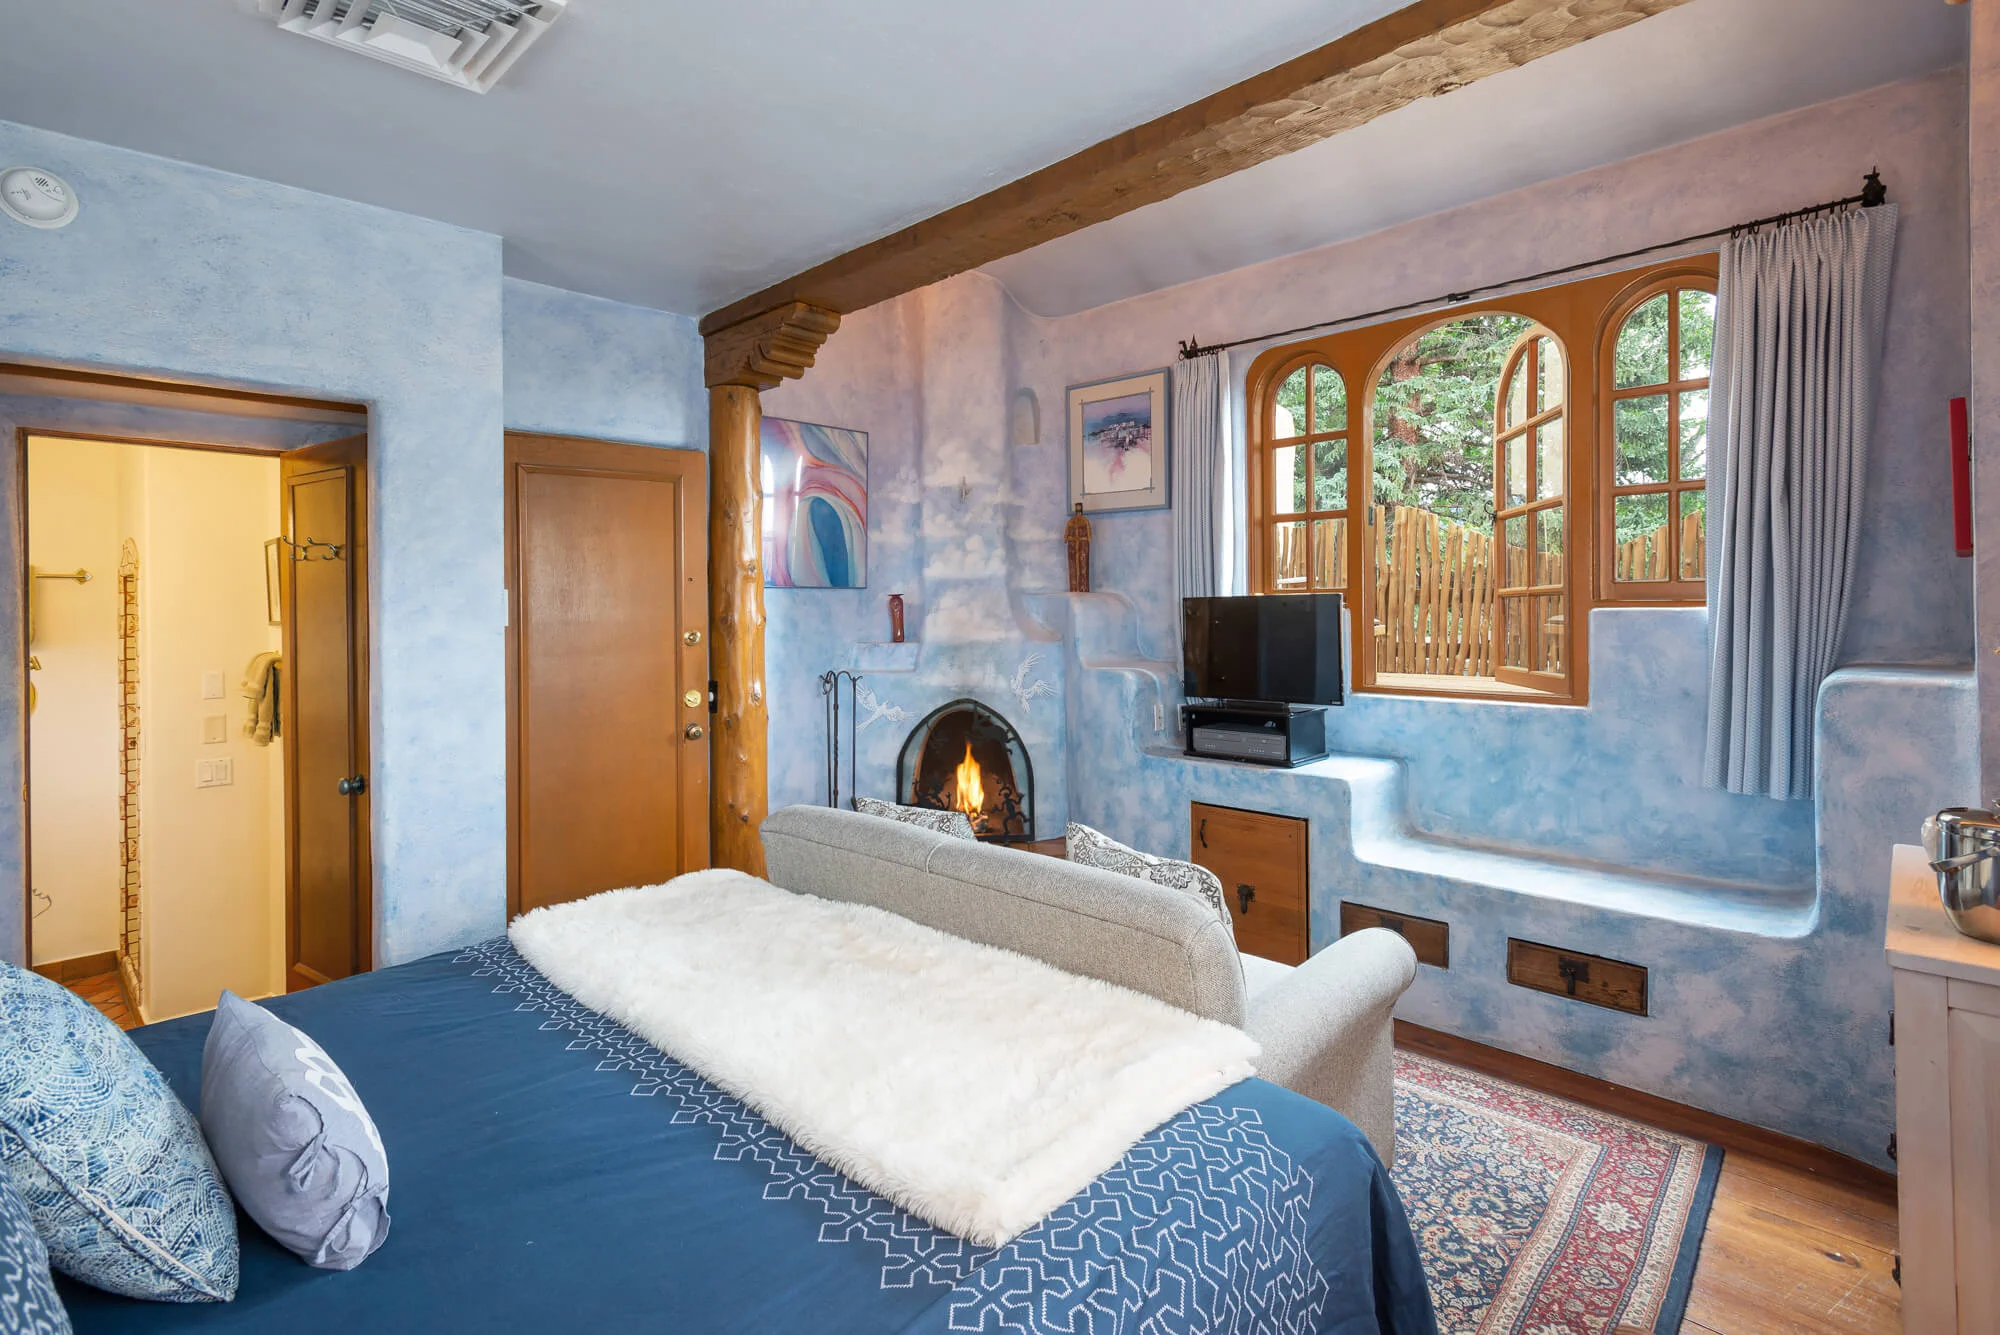 Sky Room with king bed, kiva fireplace, and romantic window that steps out on private deck